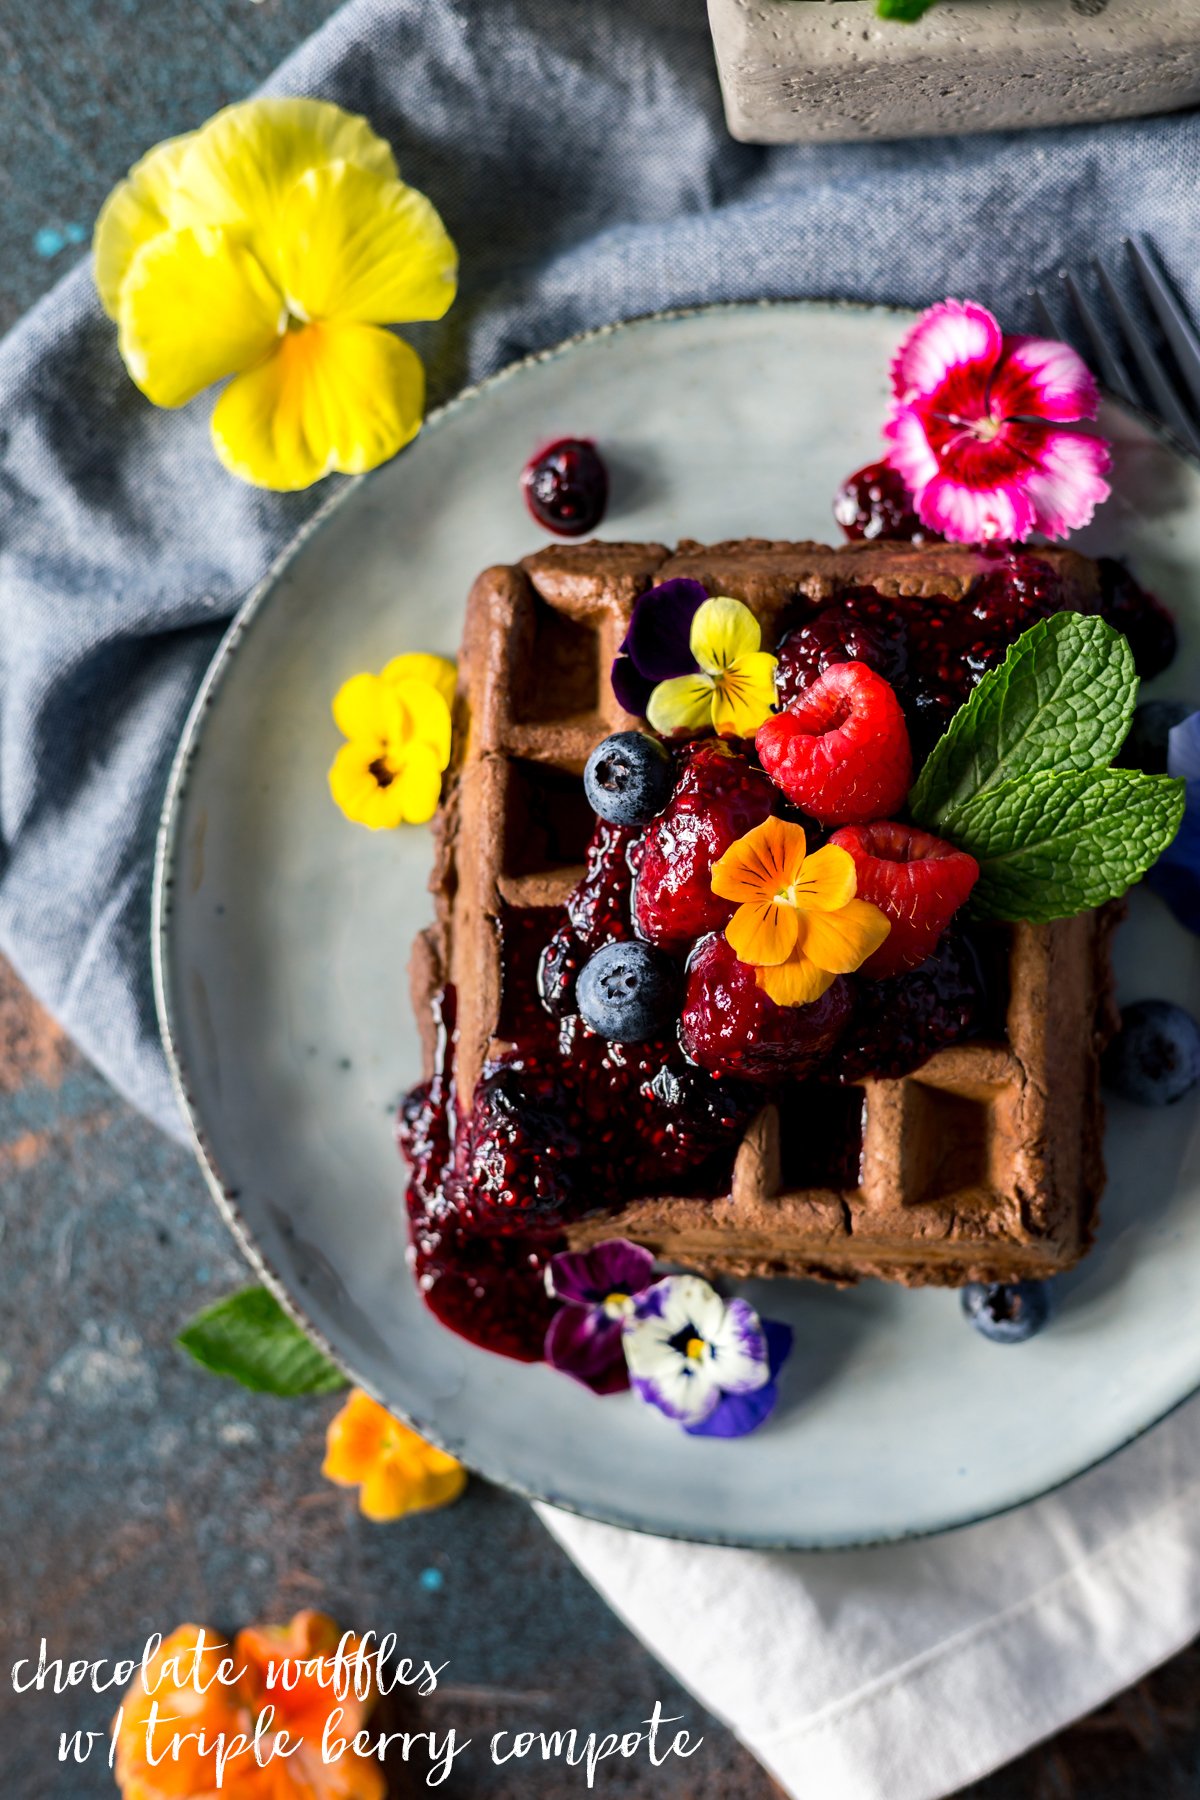 Breakfast or dessert? You decide when you whip up these sweet and savory waffle recipes! Dig into chocolate waffles with triple berry compote today! | asimplepantry.com